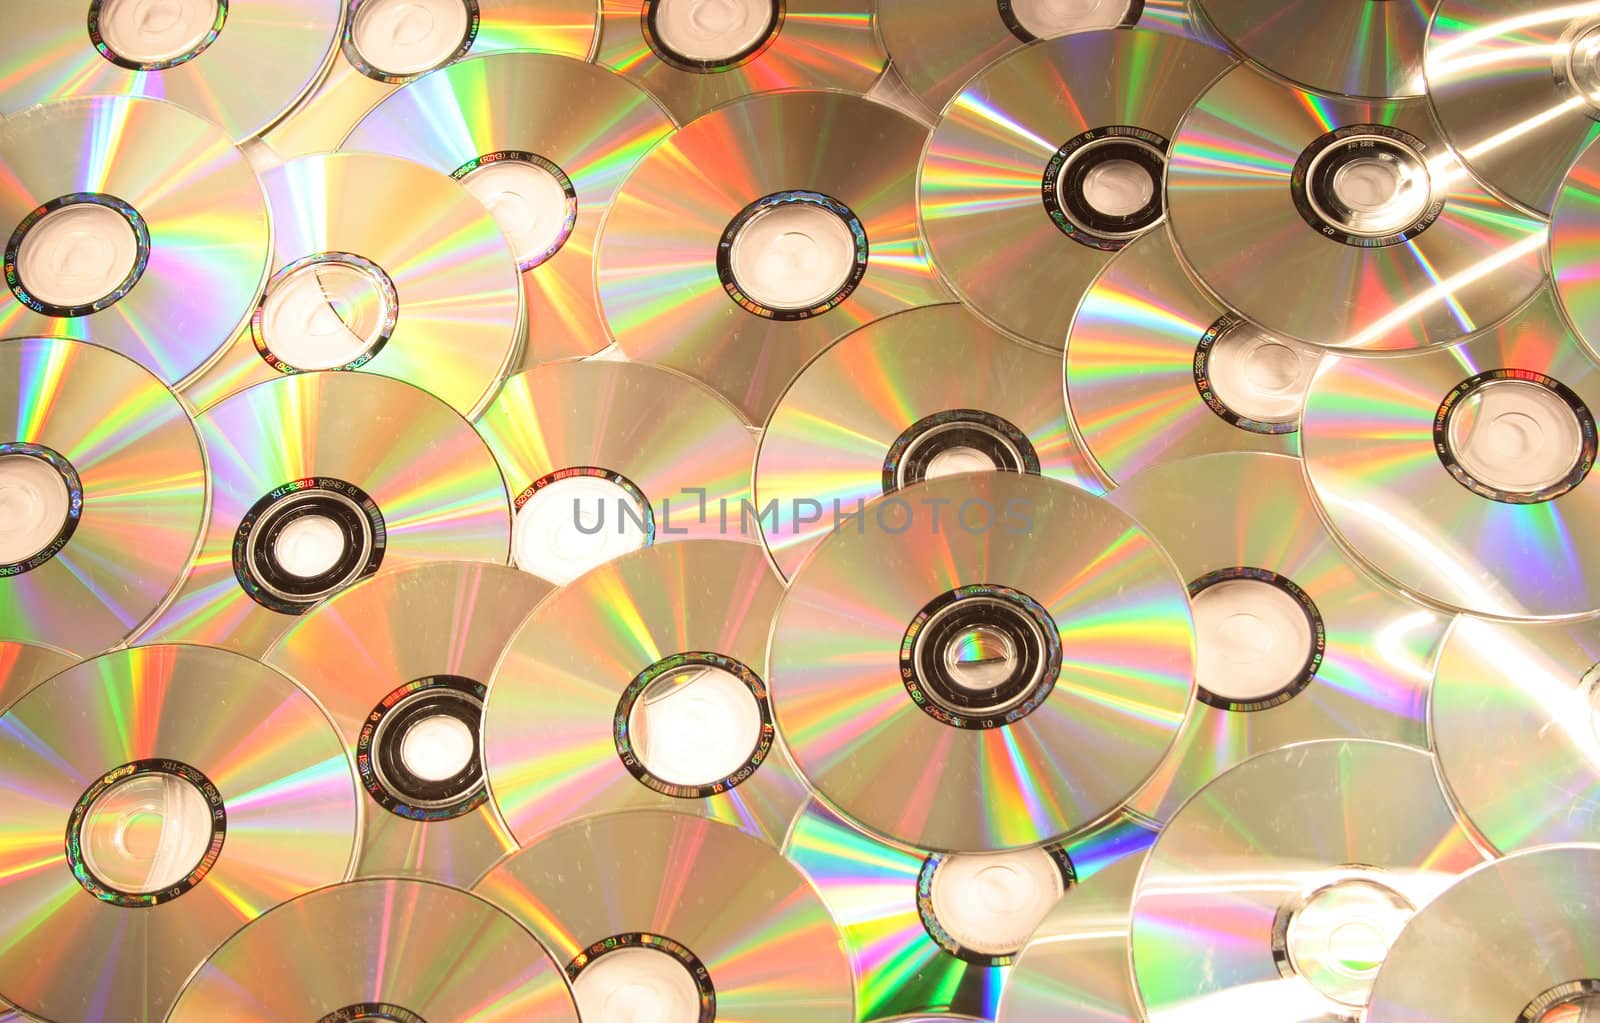 very much compact discs on the background